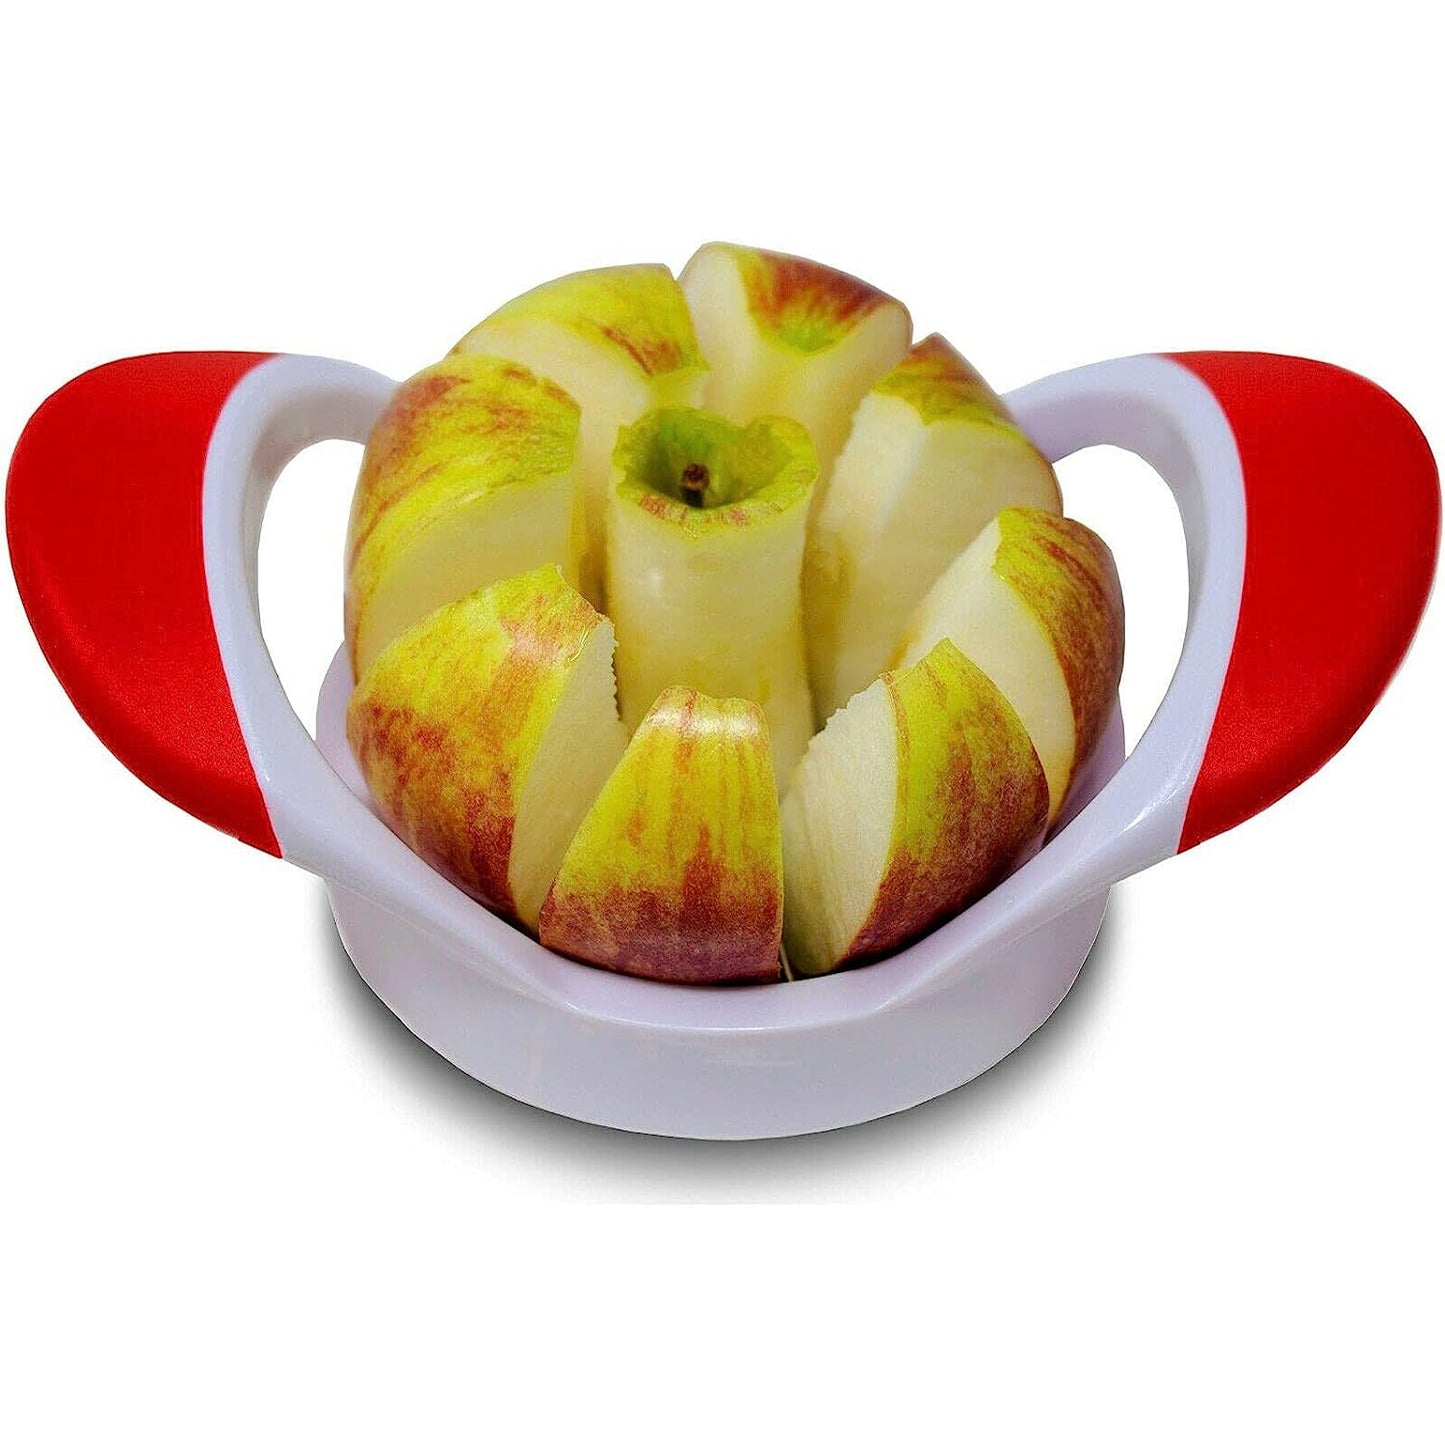 Premium Stainless Steel Apple Slicer, Corer and Divider, Easy to Use Kitchen Gadget